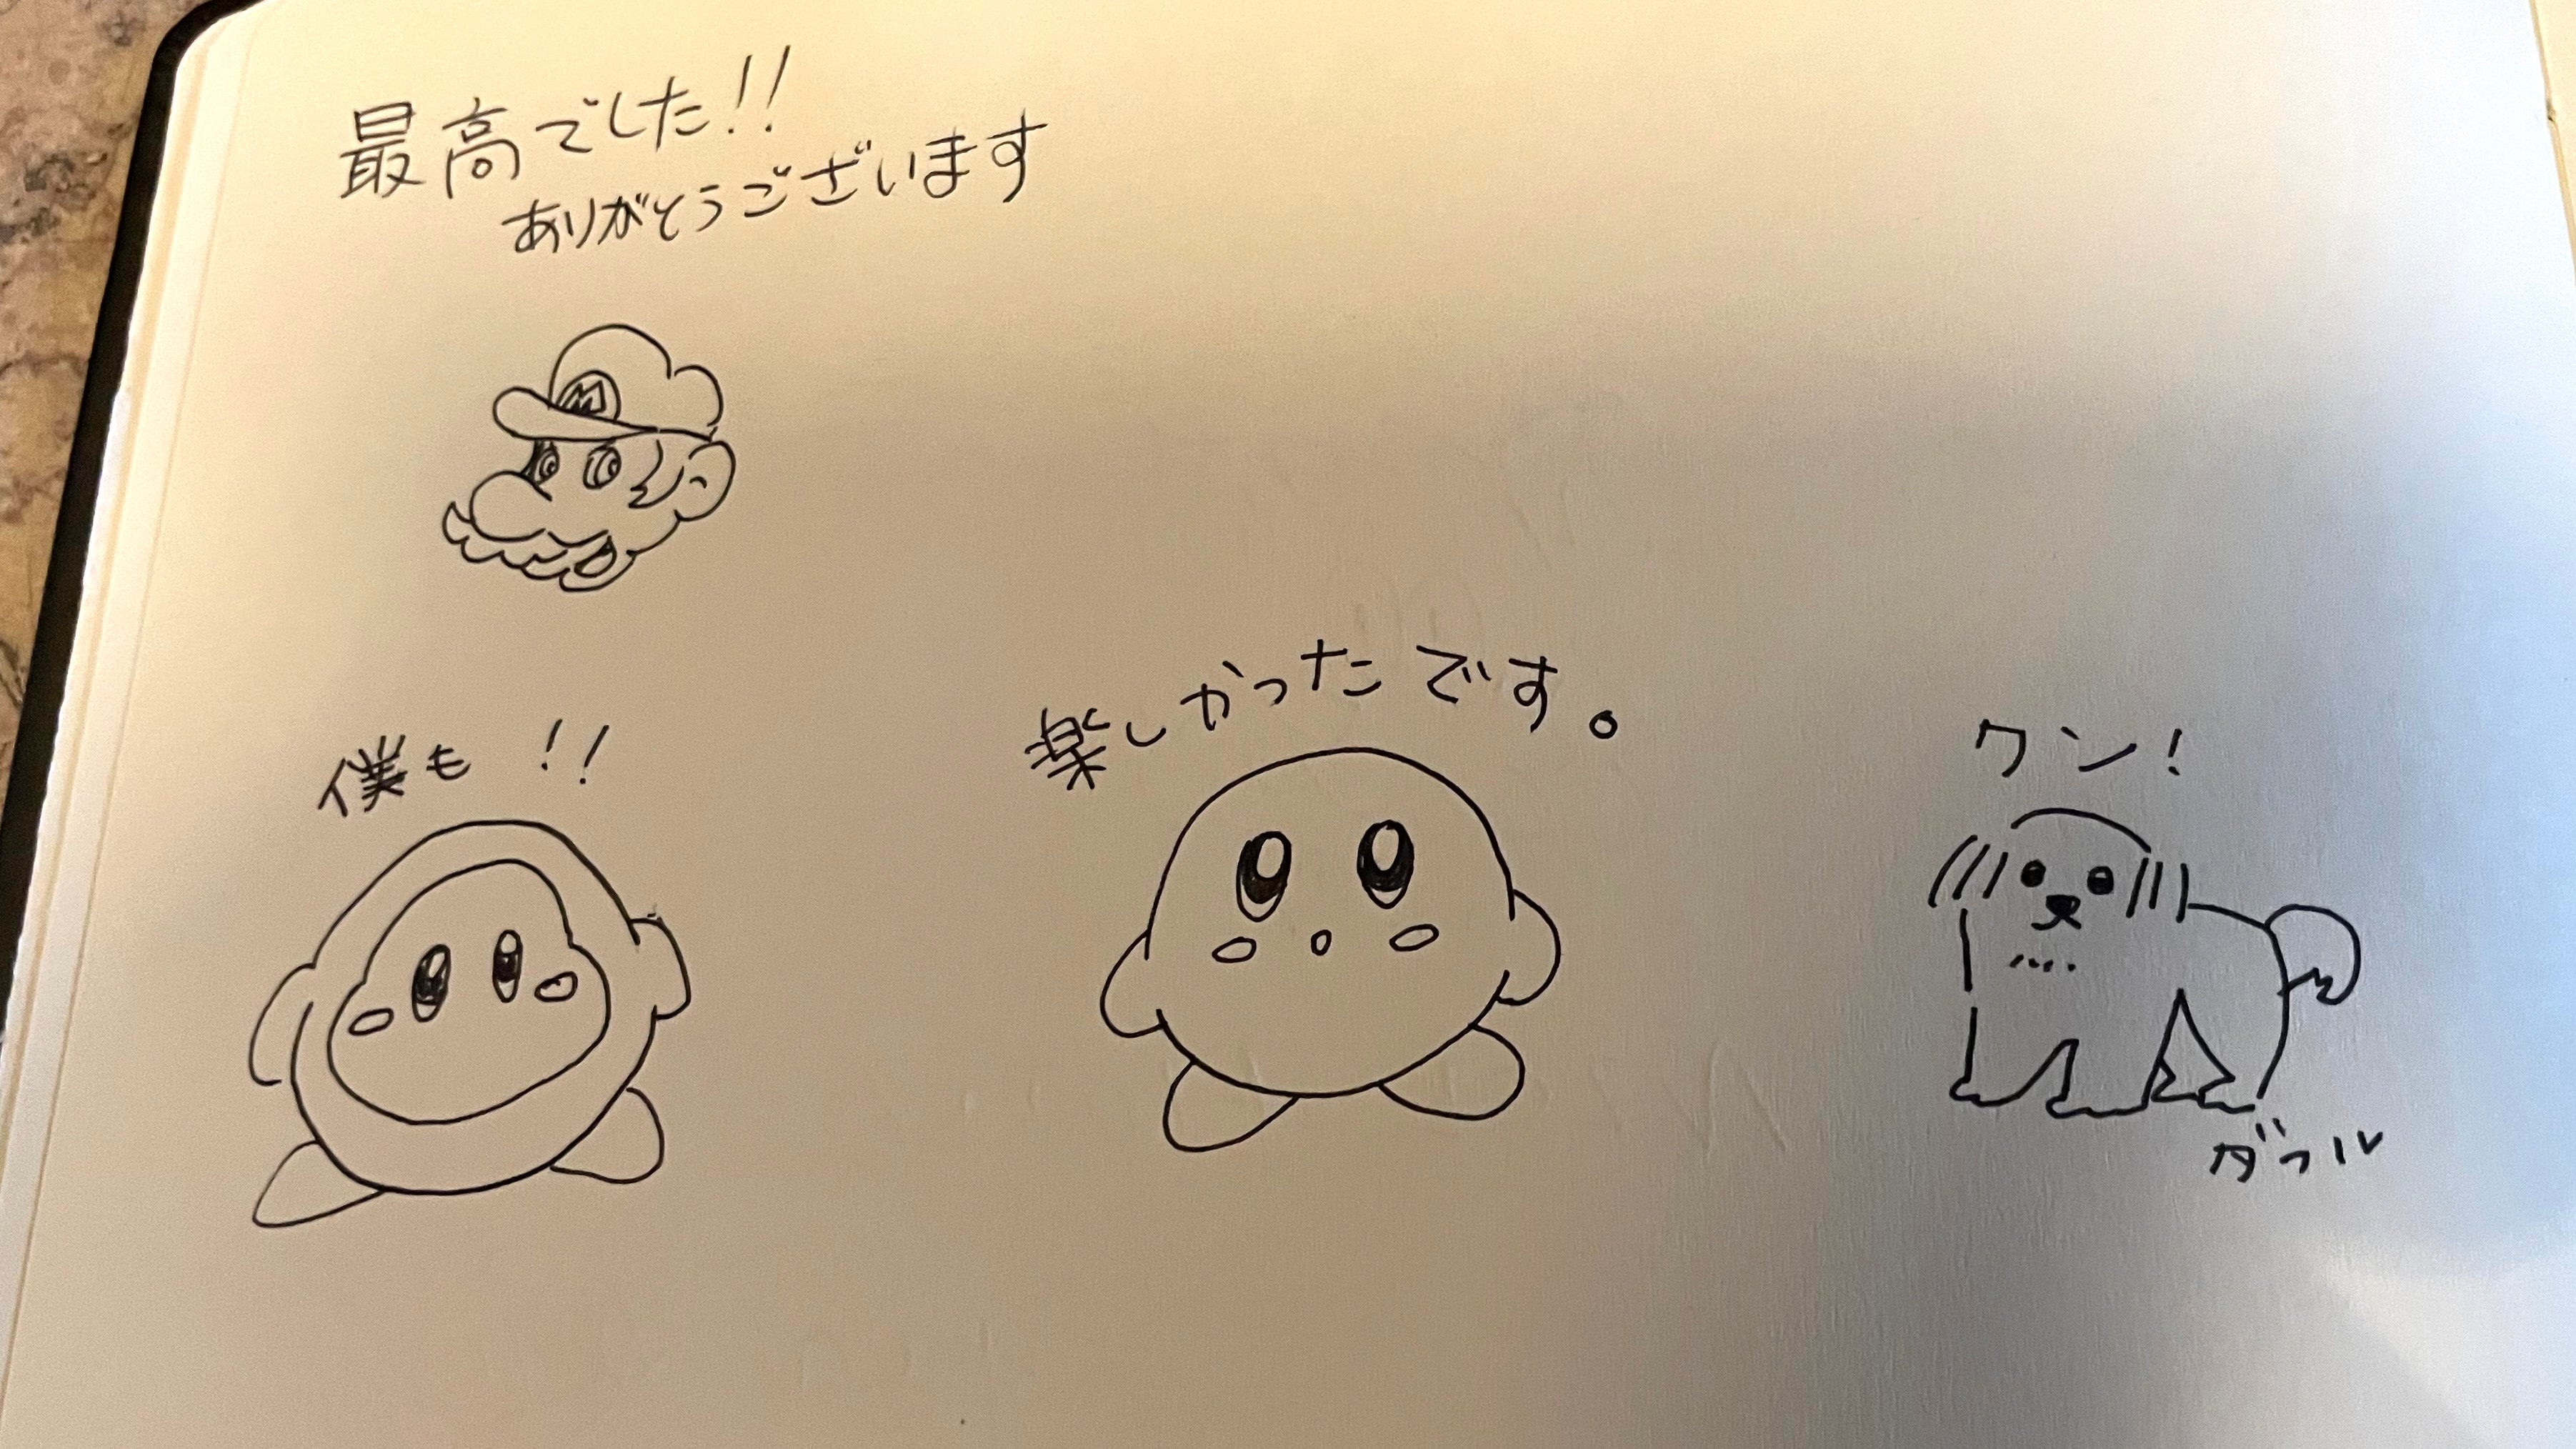 A hotel guestbook but one with the Nintendo characters Mario and Kirby, and Japanese writing annotating them.